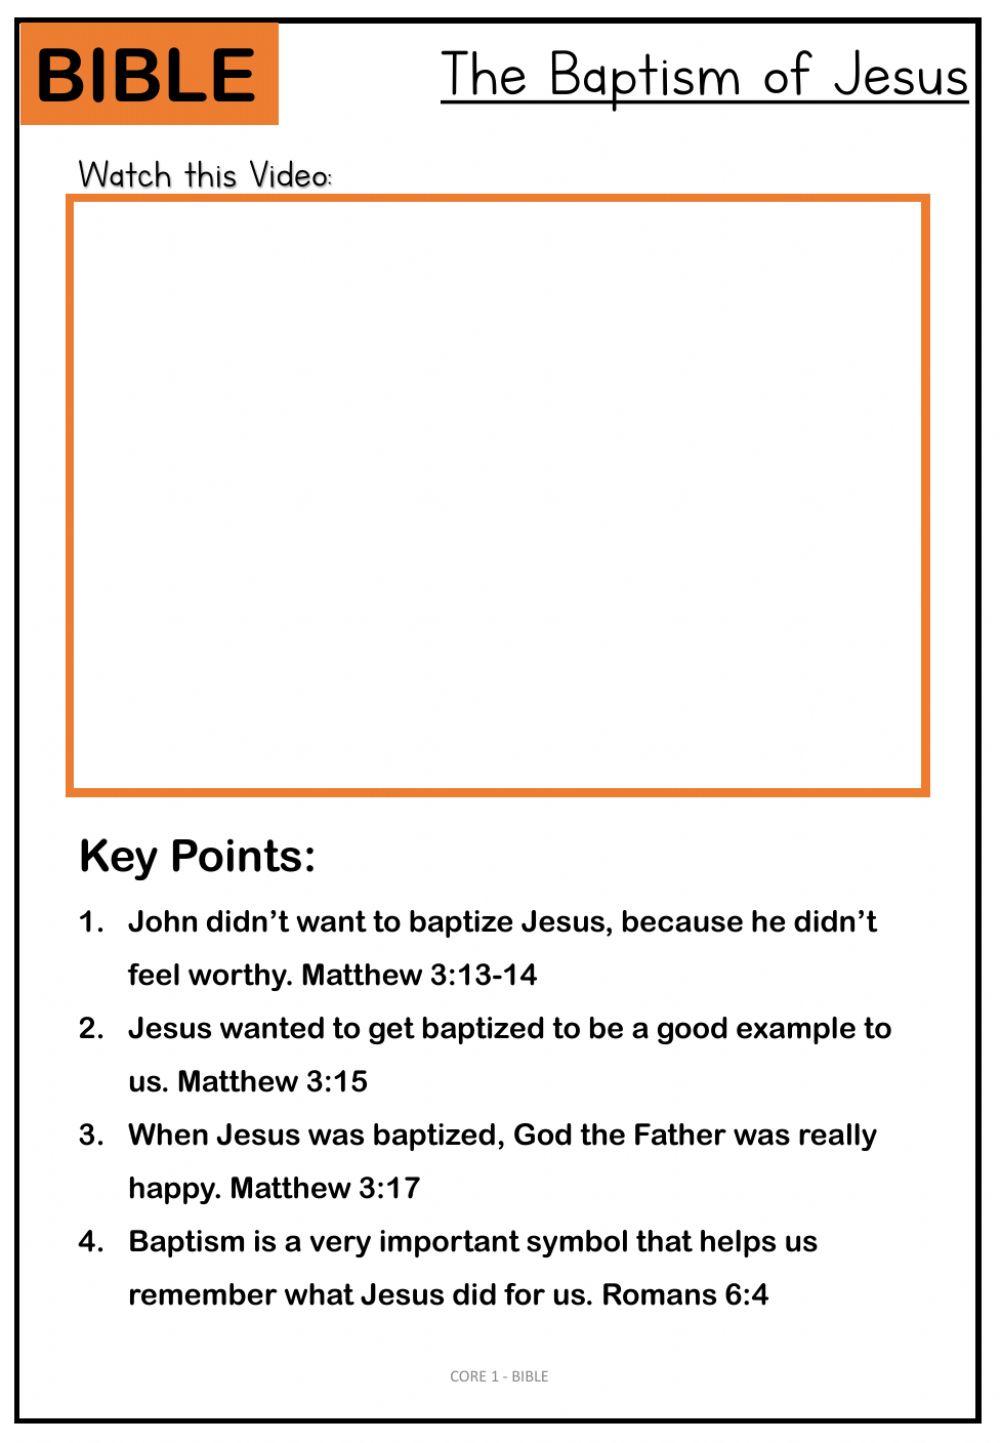 CORE 1 - BIBLE - The Baptism of Jesus